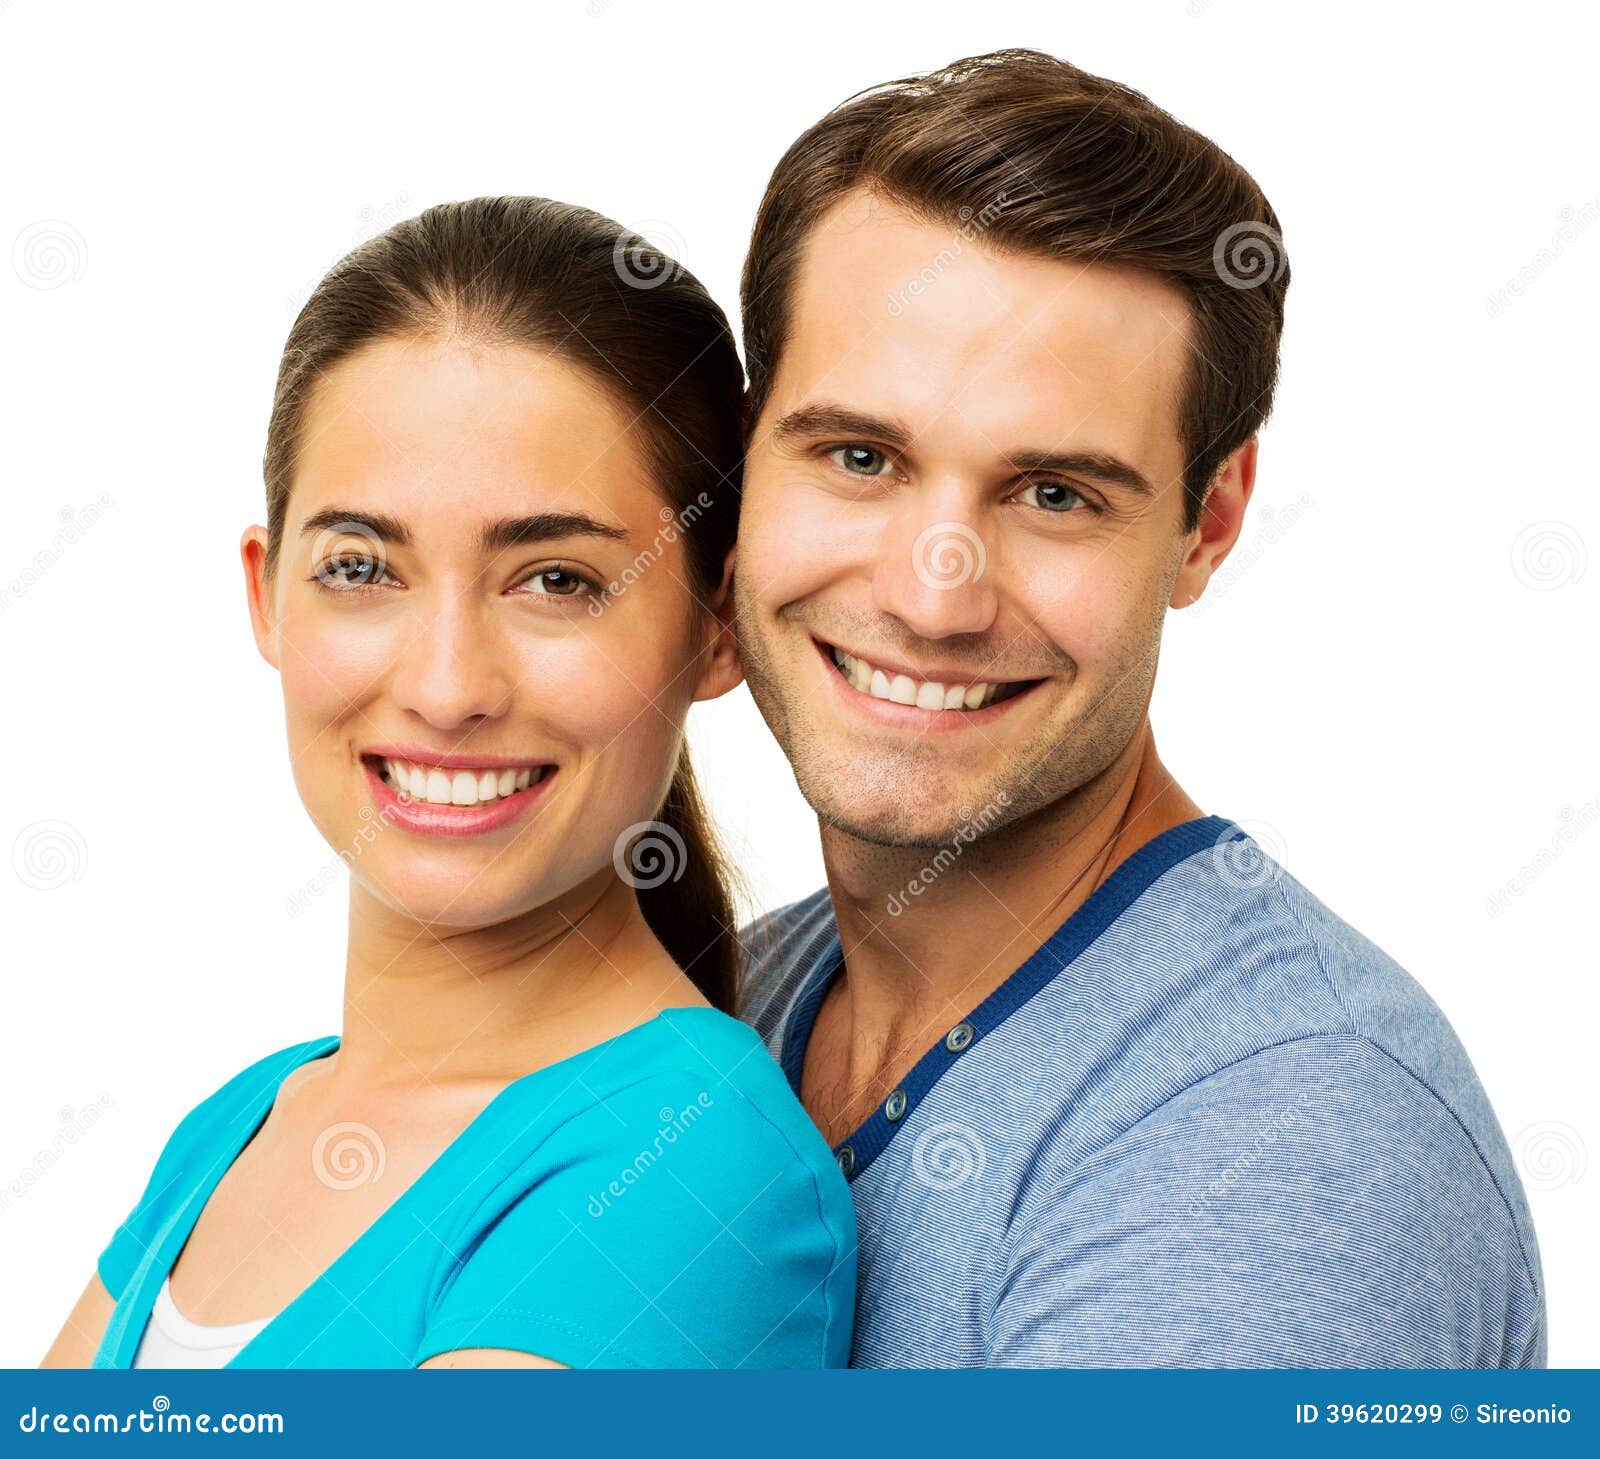 Man and Woman Smiling Against White Background Stock Image - Image of ...